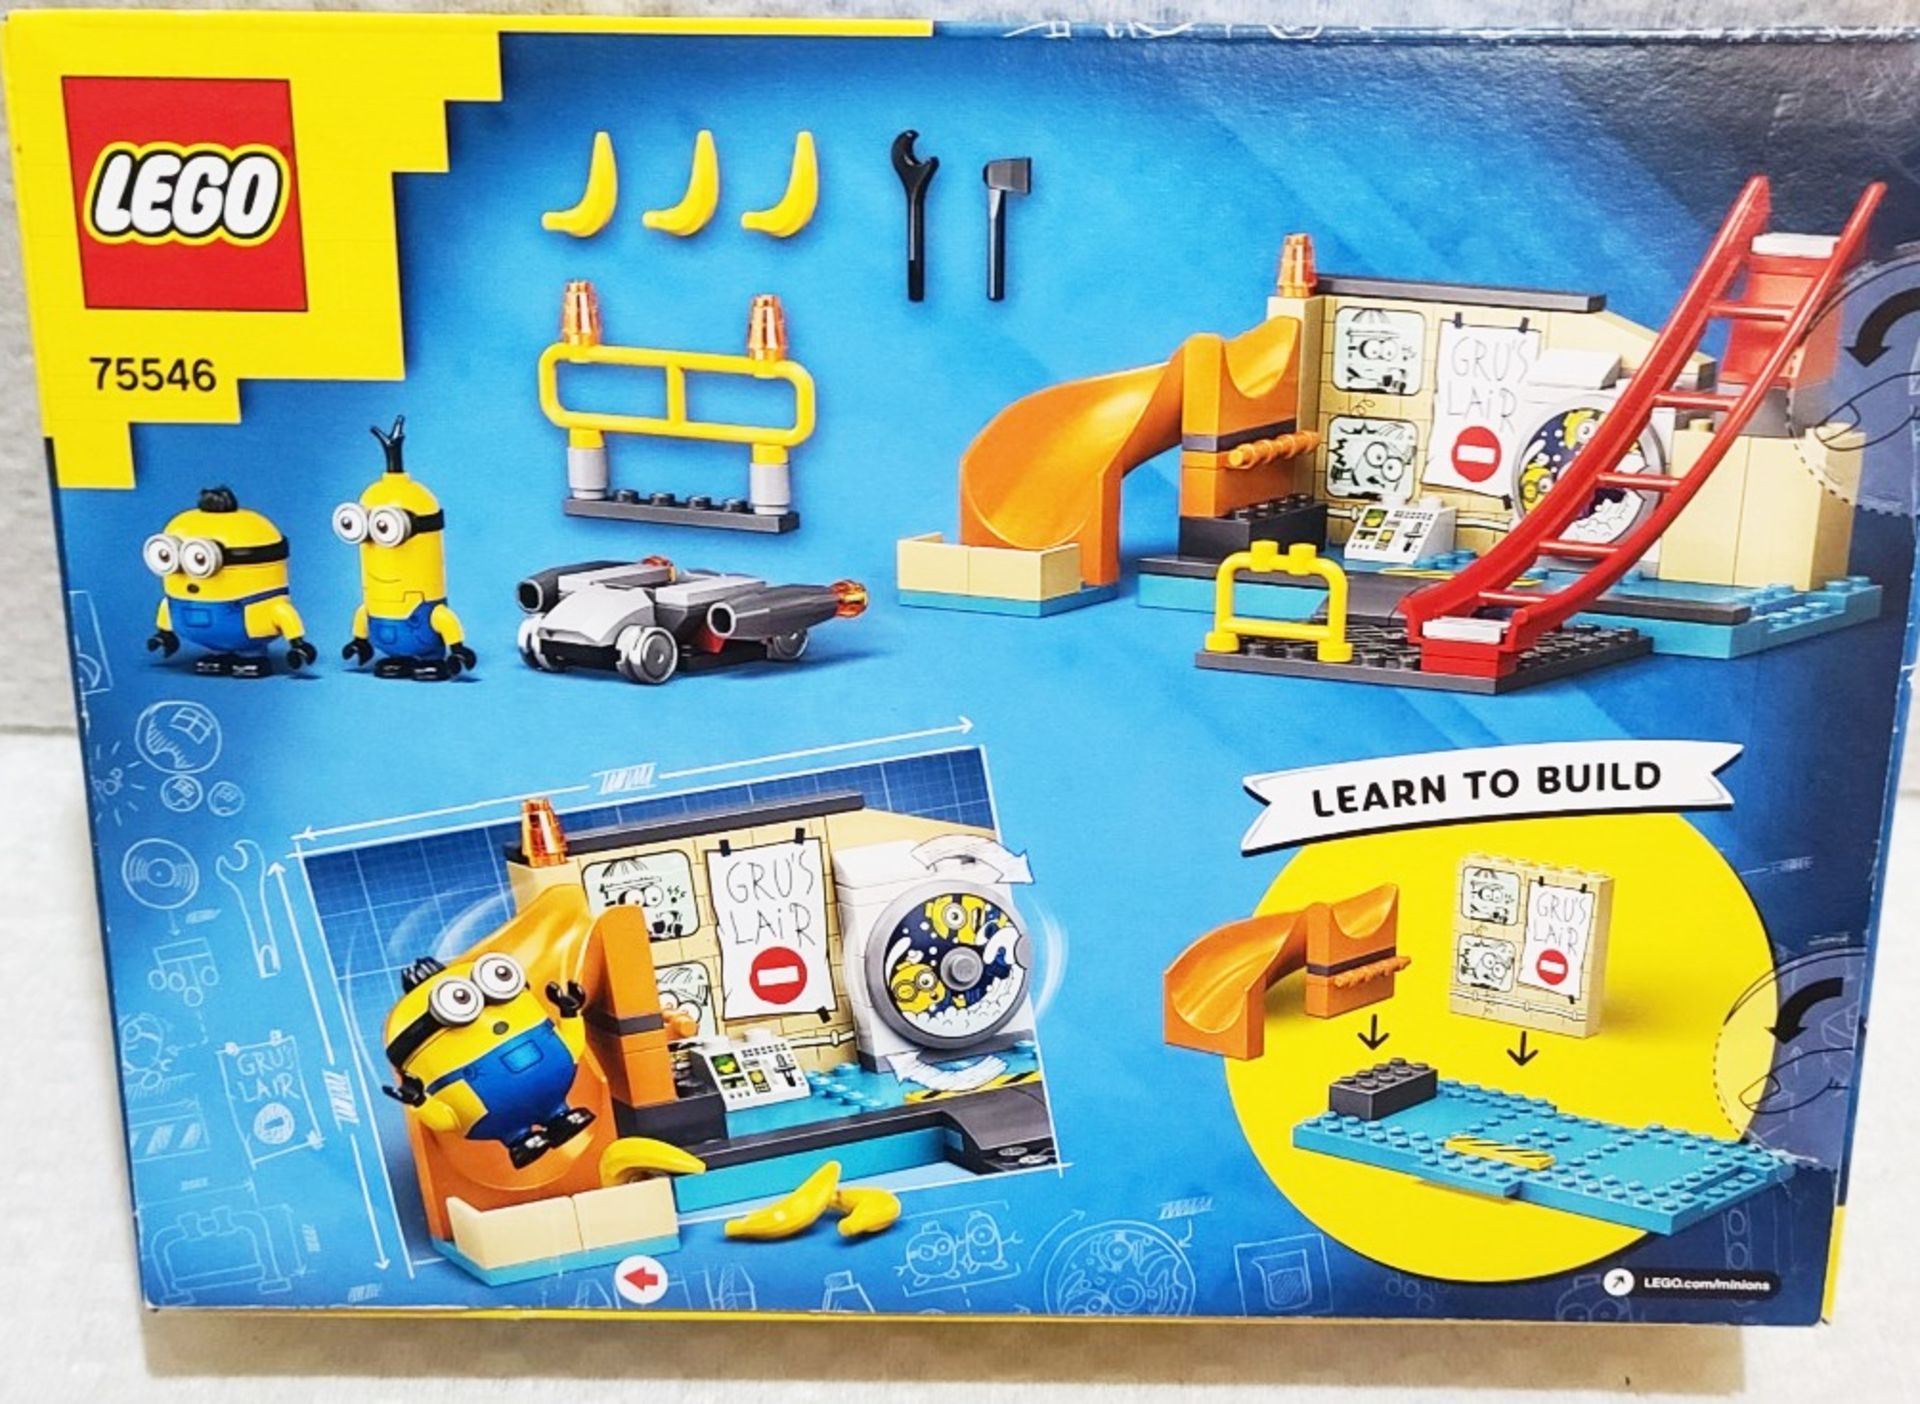 1 x LEGO Minions in Gru’s Lab Building Set - Unused Boxed Stock - Image 2 of 5